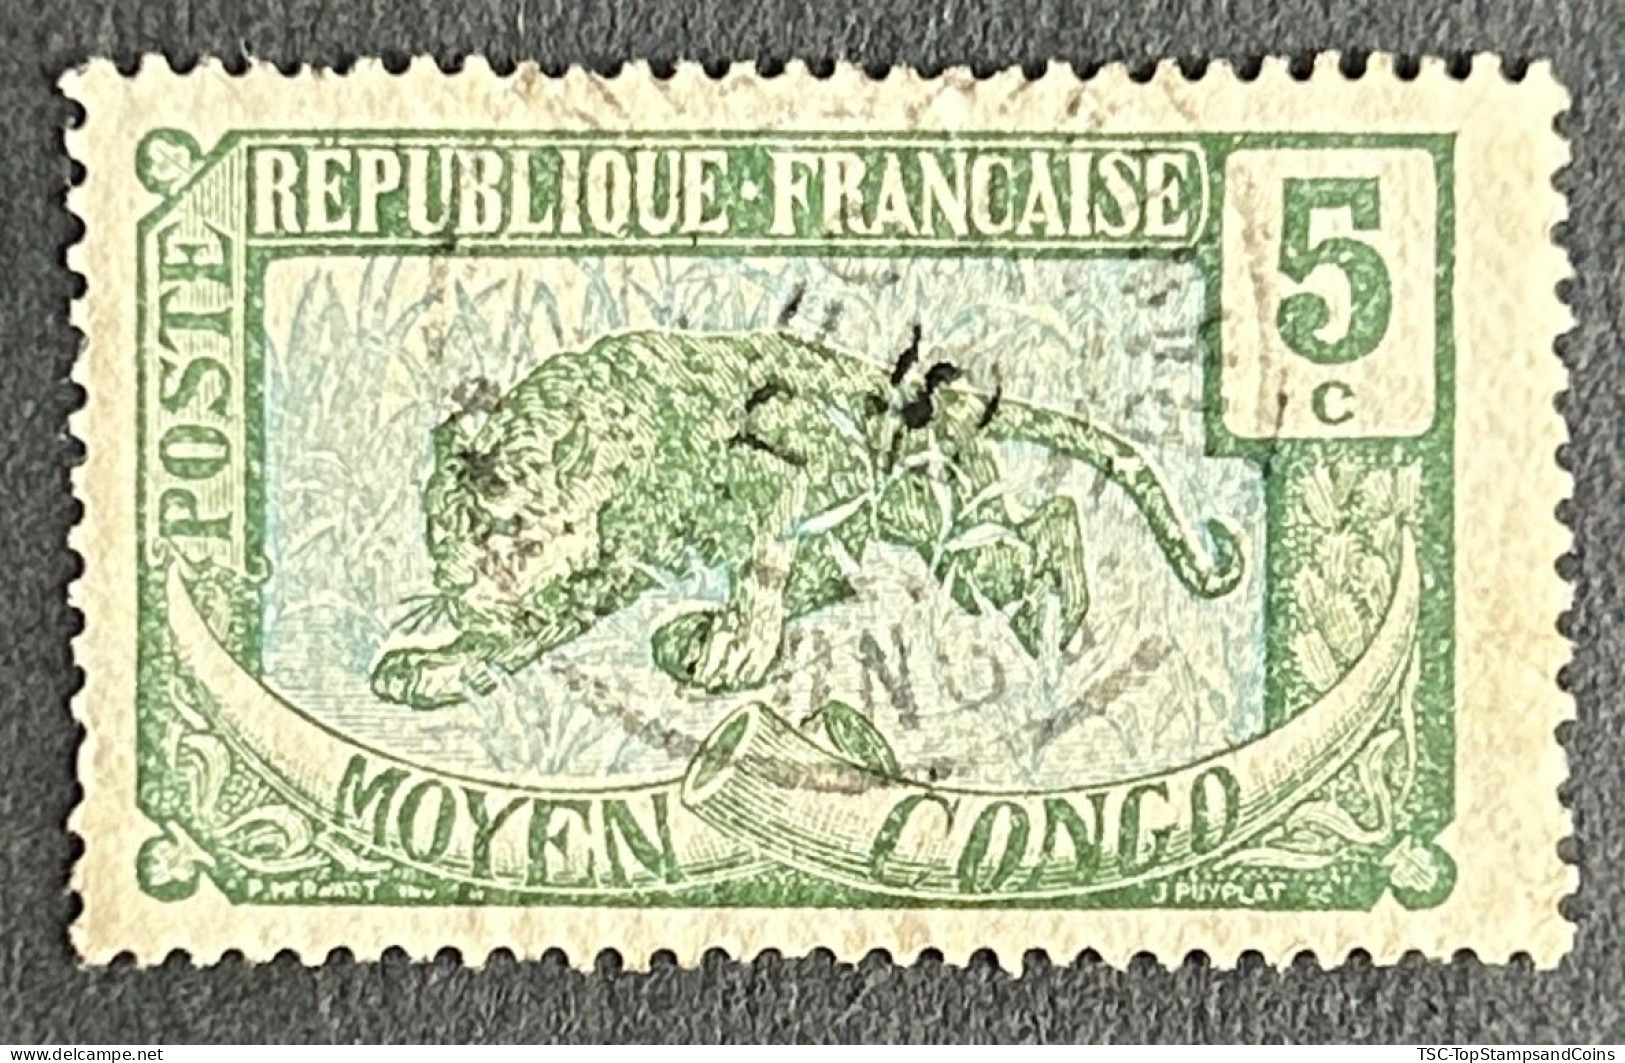 FRCG051UC - Leopard - 5 C Used Stamp - Middle Congo - 1907 - Used Stamps